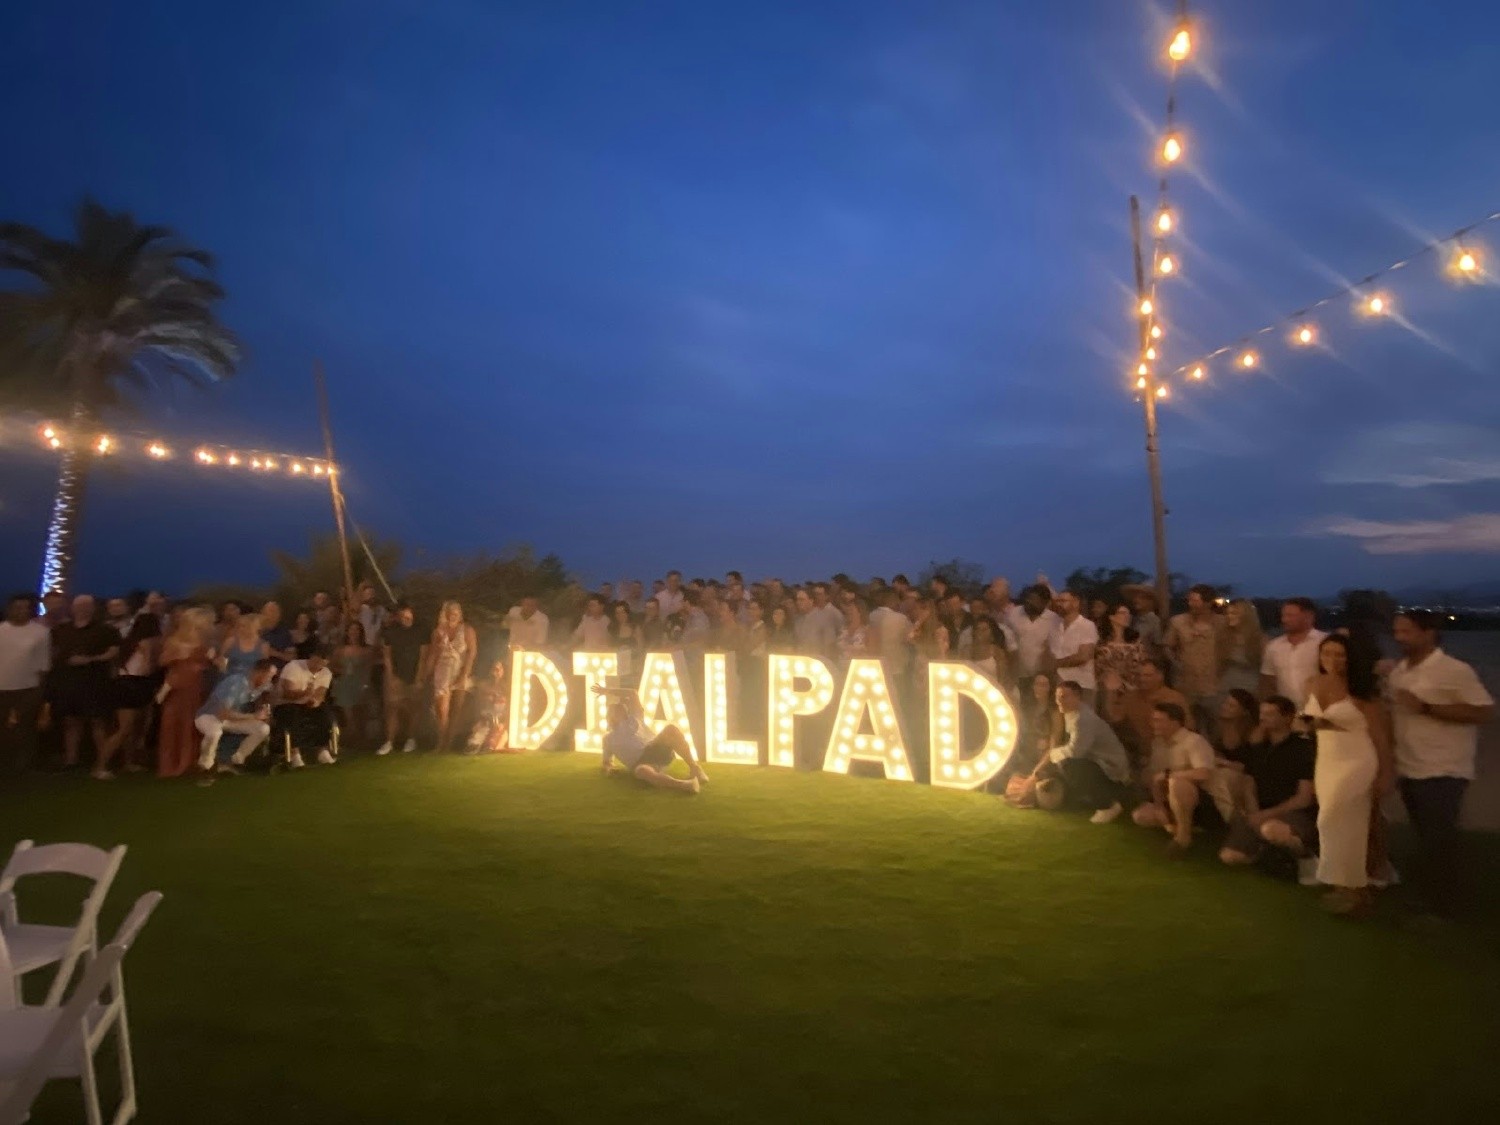 At Dialpad, we know how to work beautifully (in and out of the office)!